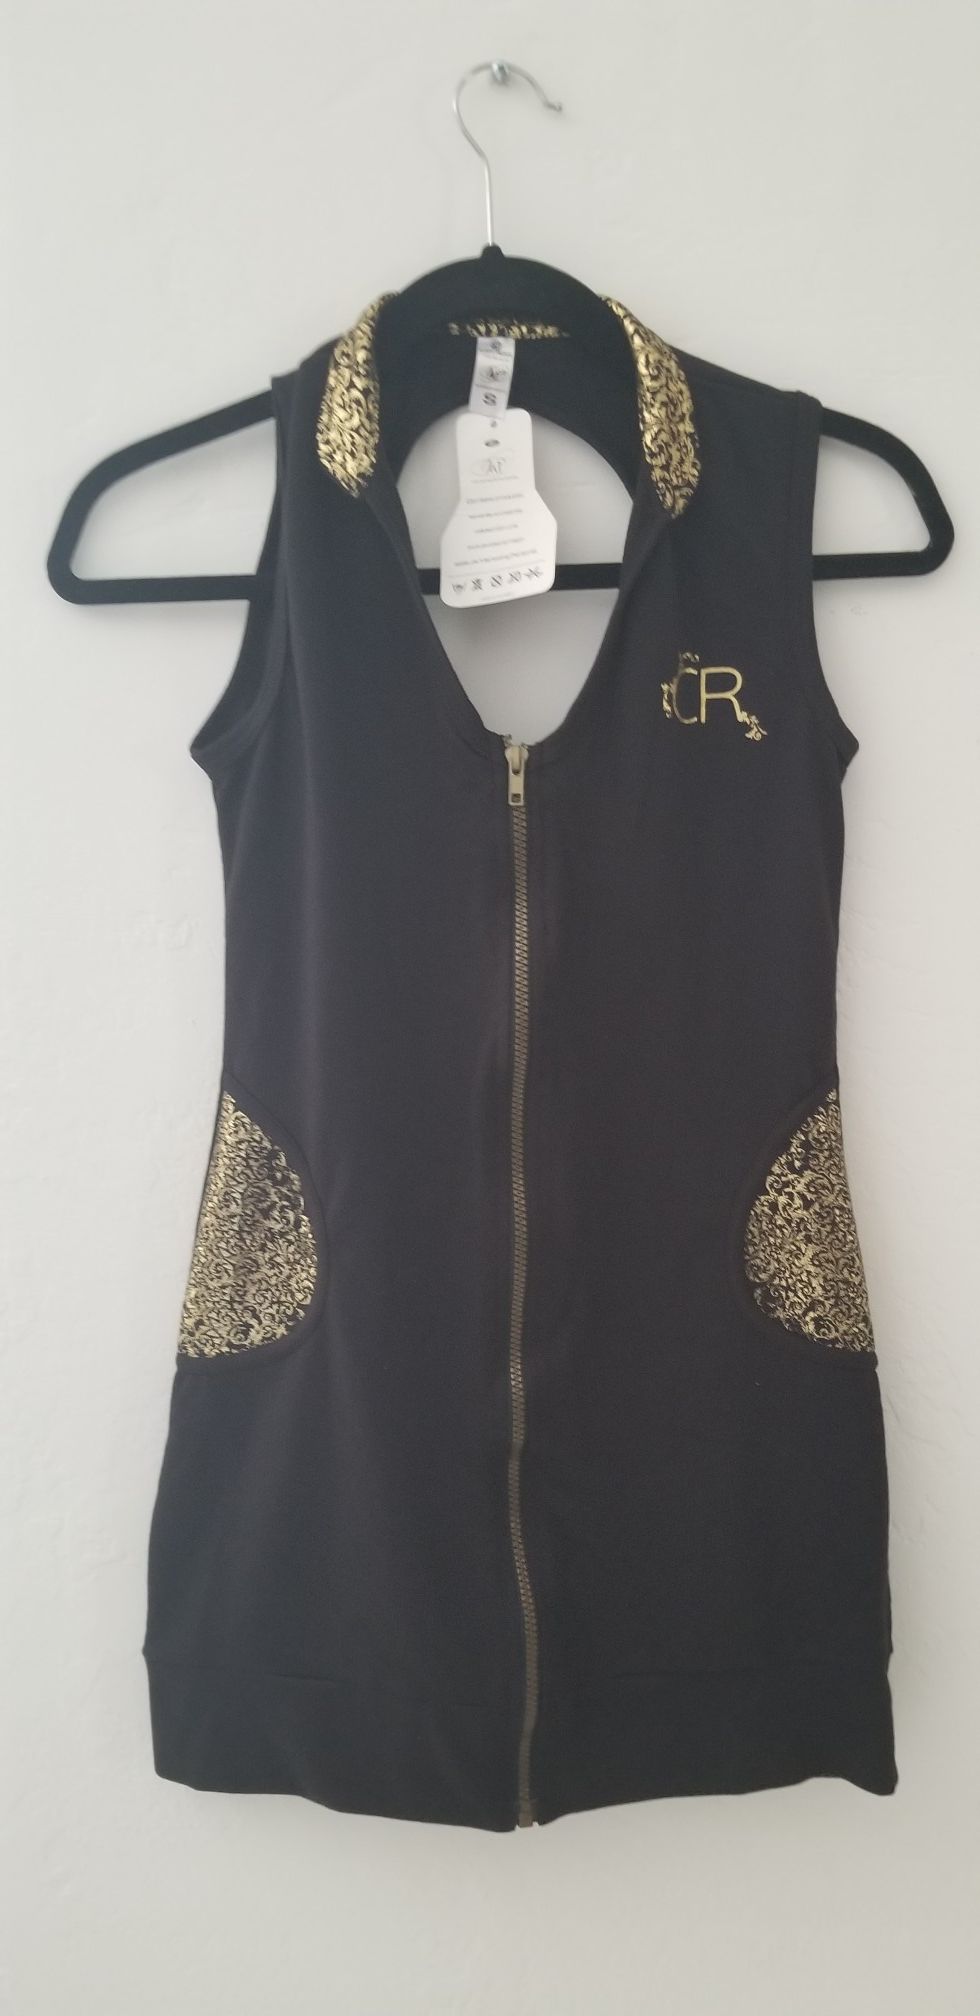 Black and gold dress for women